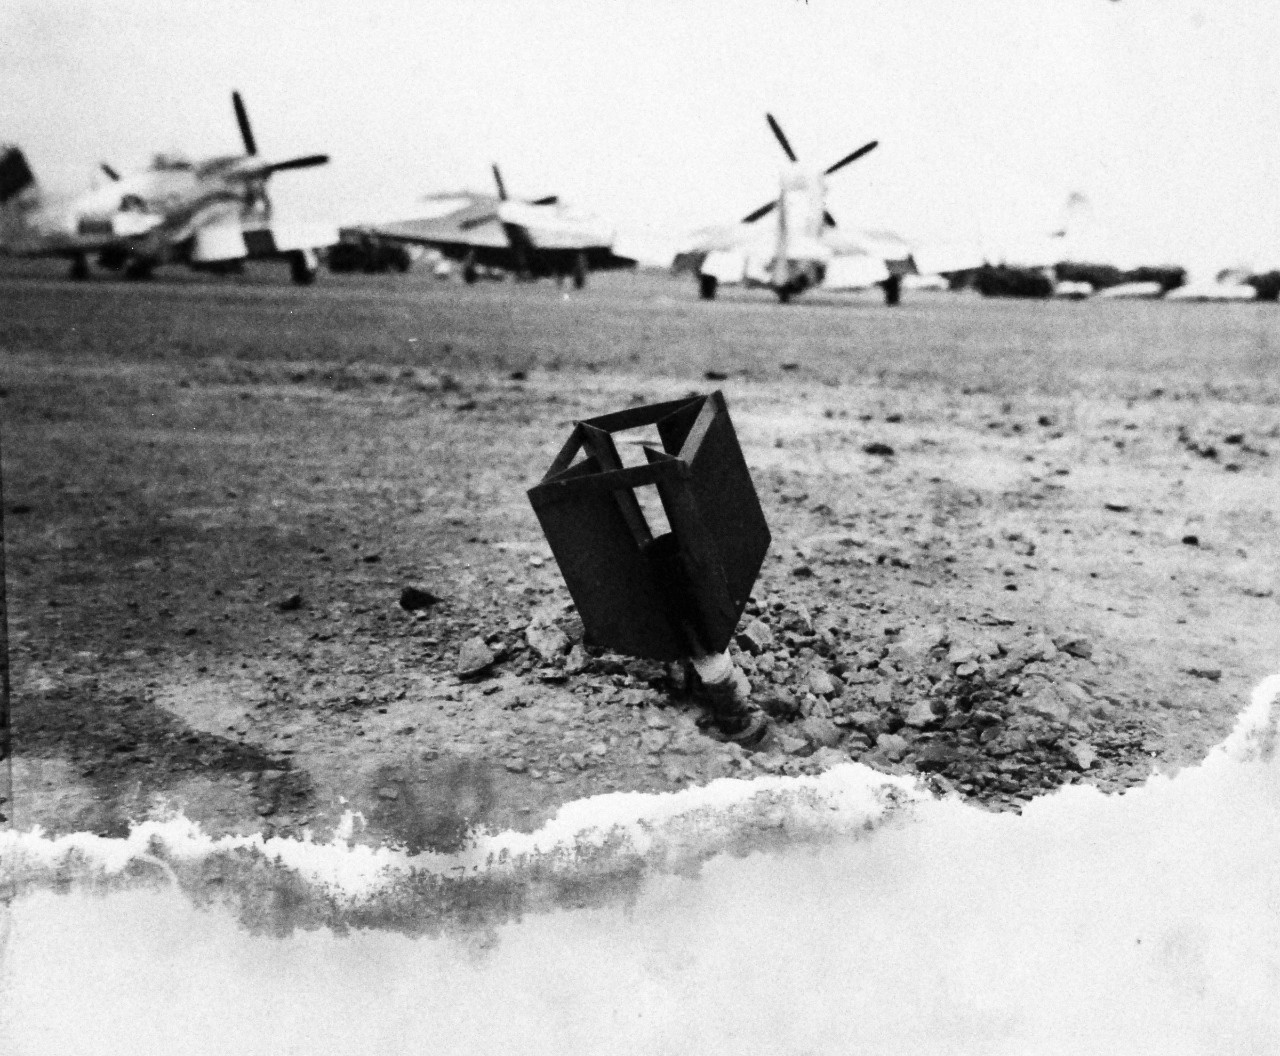 127-GW-304-114274:  Battle for Iwo Jima, February-March 1945.   Tail fin of a Japanese rocket sticking out of the airfield.  Photographed by Altfather, March 10, 1945.  U.S. Marine Corps photograph, now in the collections of the National Archives.  (2016/02/17).   This photograph is damaged.  